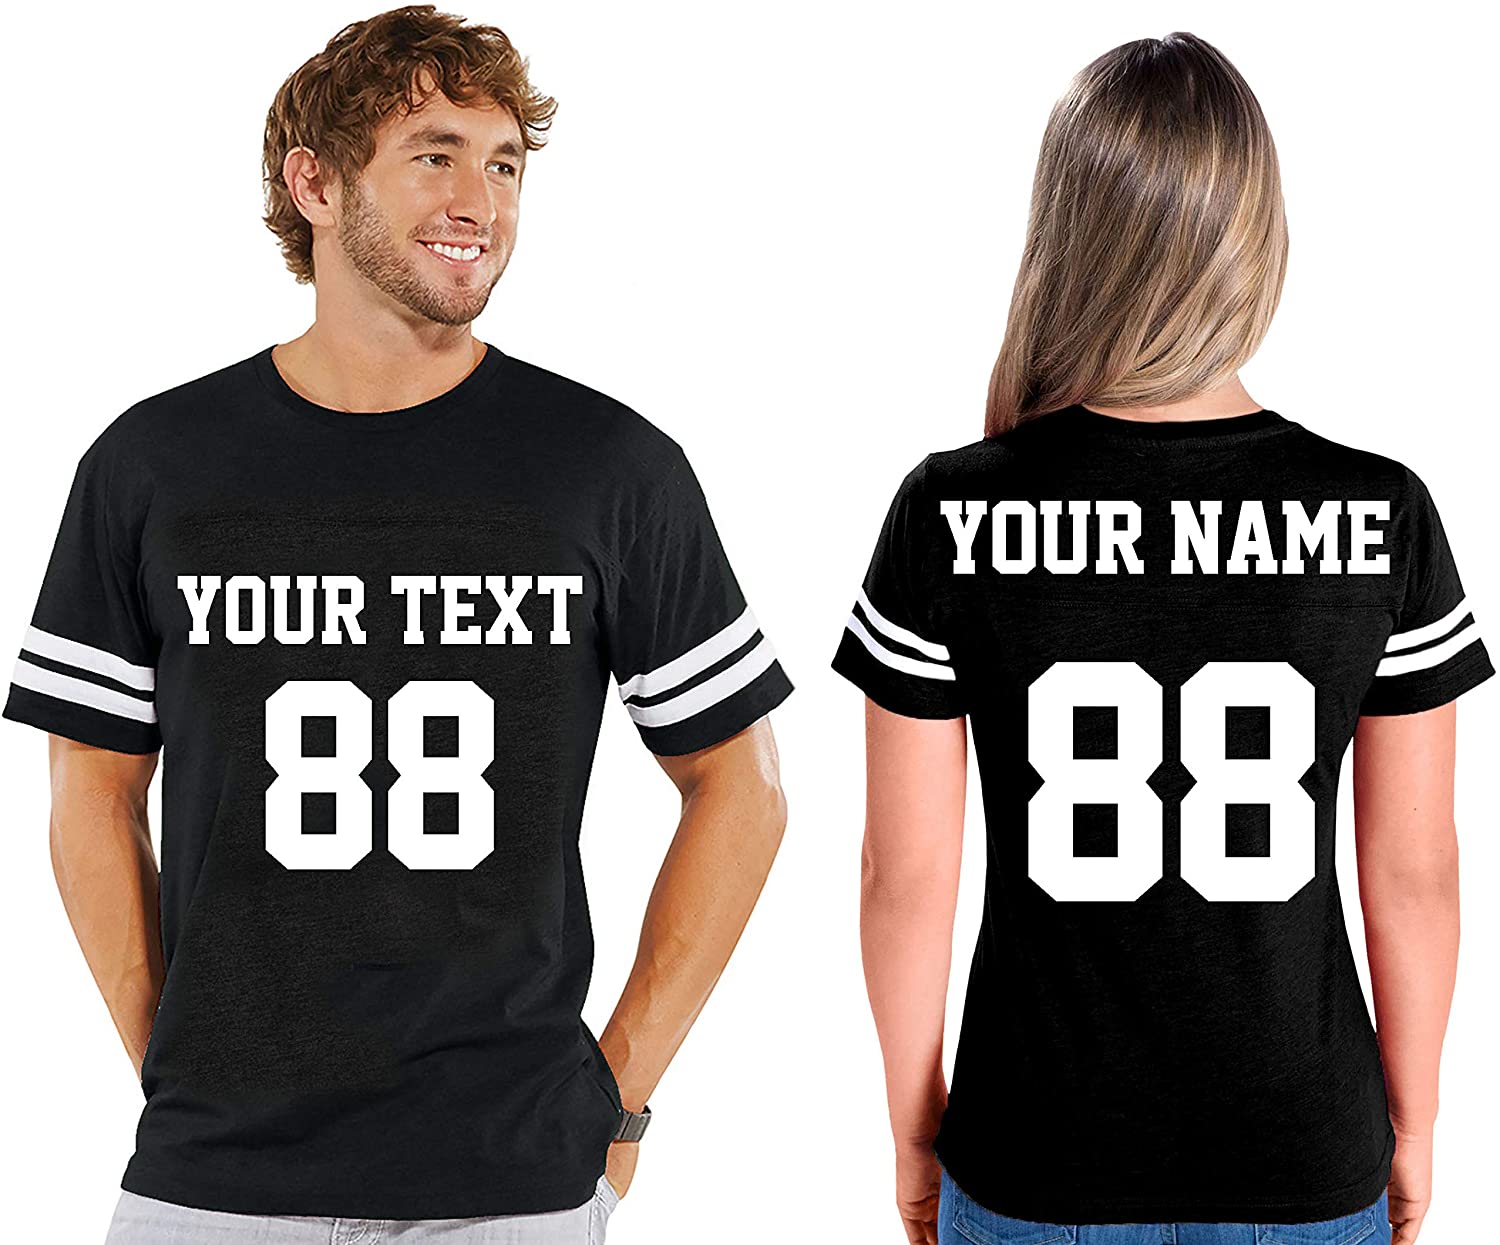 Custom 2 Sided Cotton Jerseys for Women - Personalized Team Uniforms for Casual Outfit